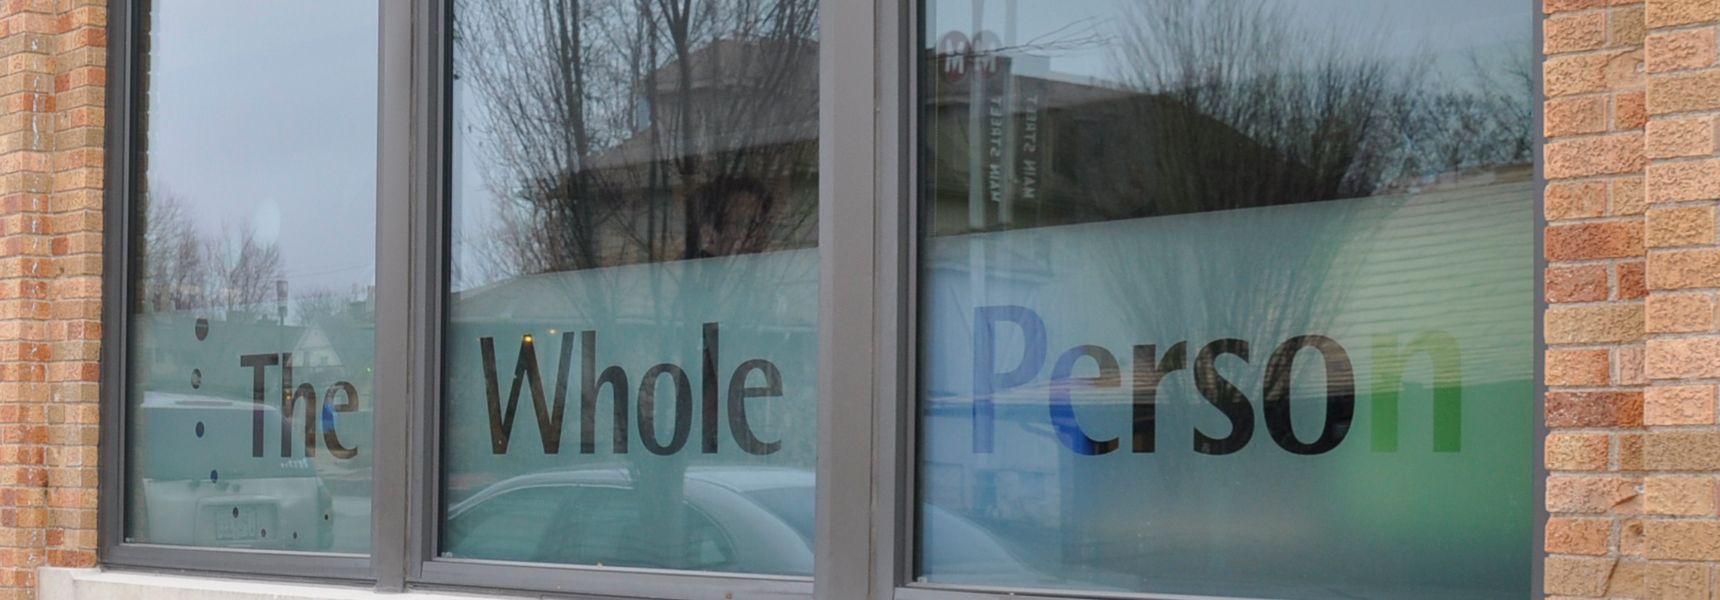 Exterior etched window with TWP logo